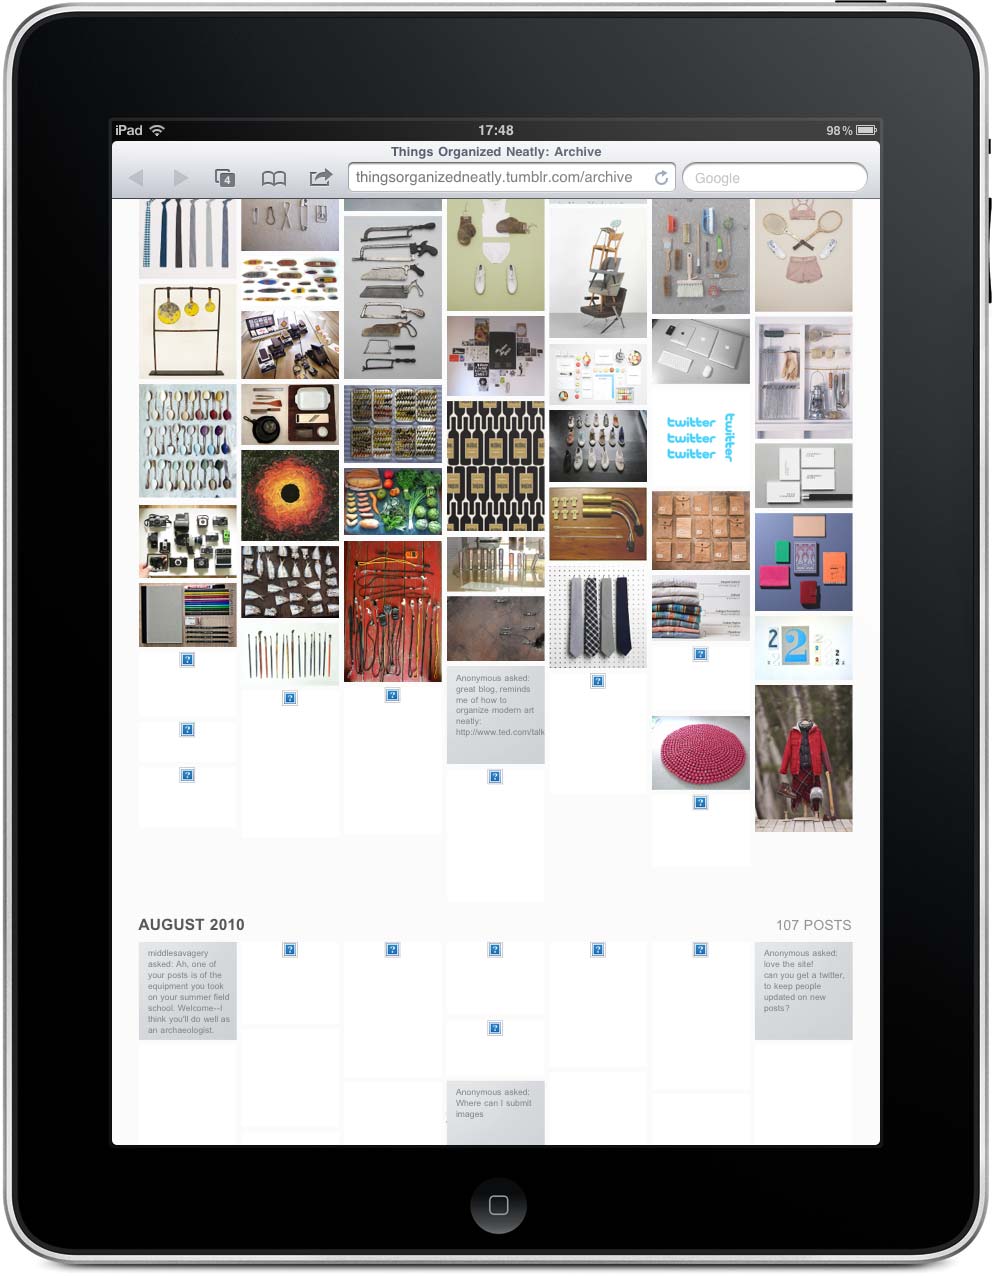 Screenshot of Things Organized Neatly’s archive page with unloaded images